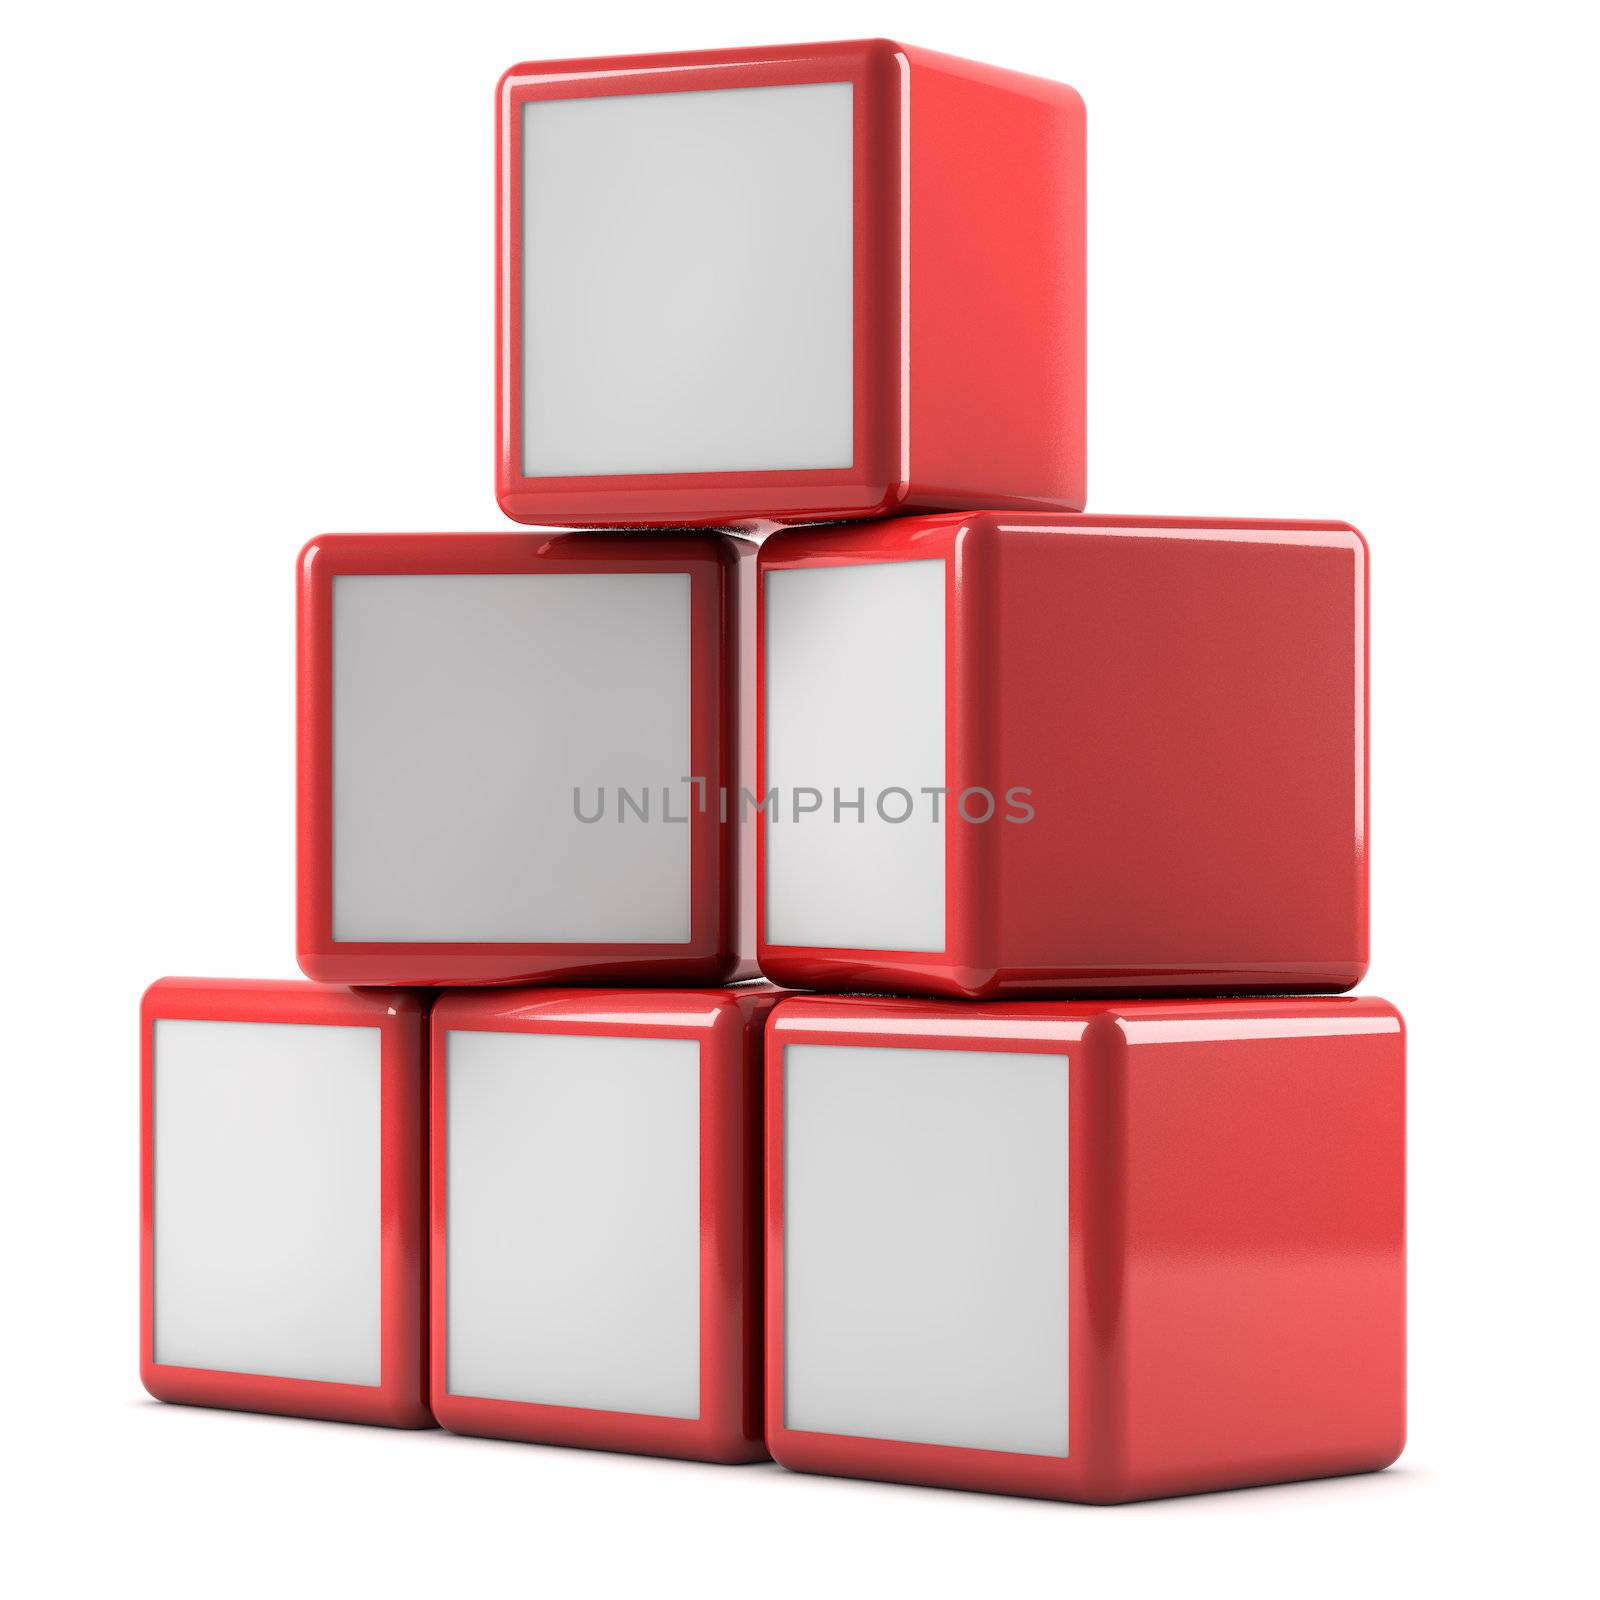 Advertising boxes by dynamicfoto